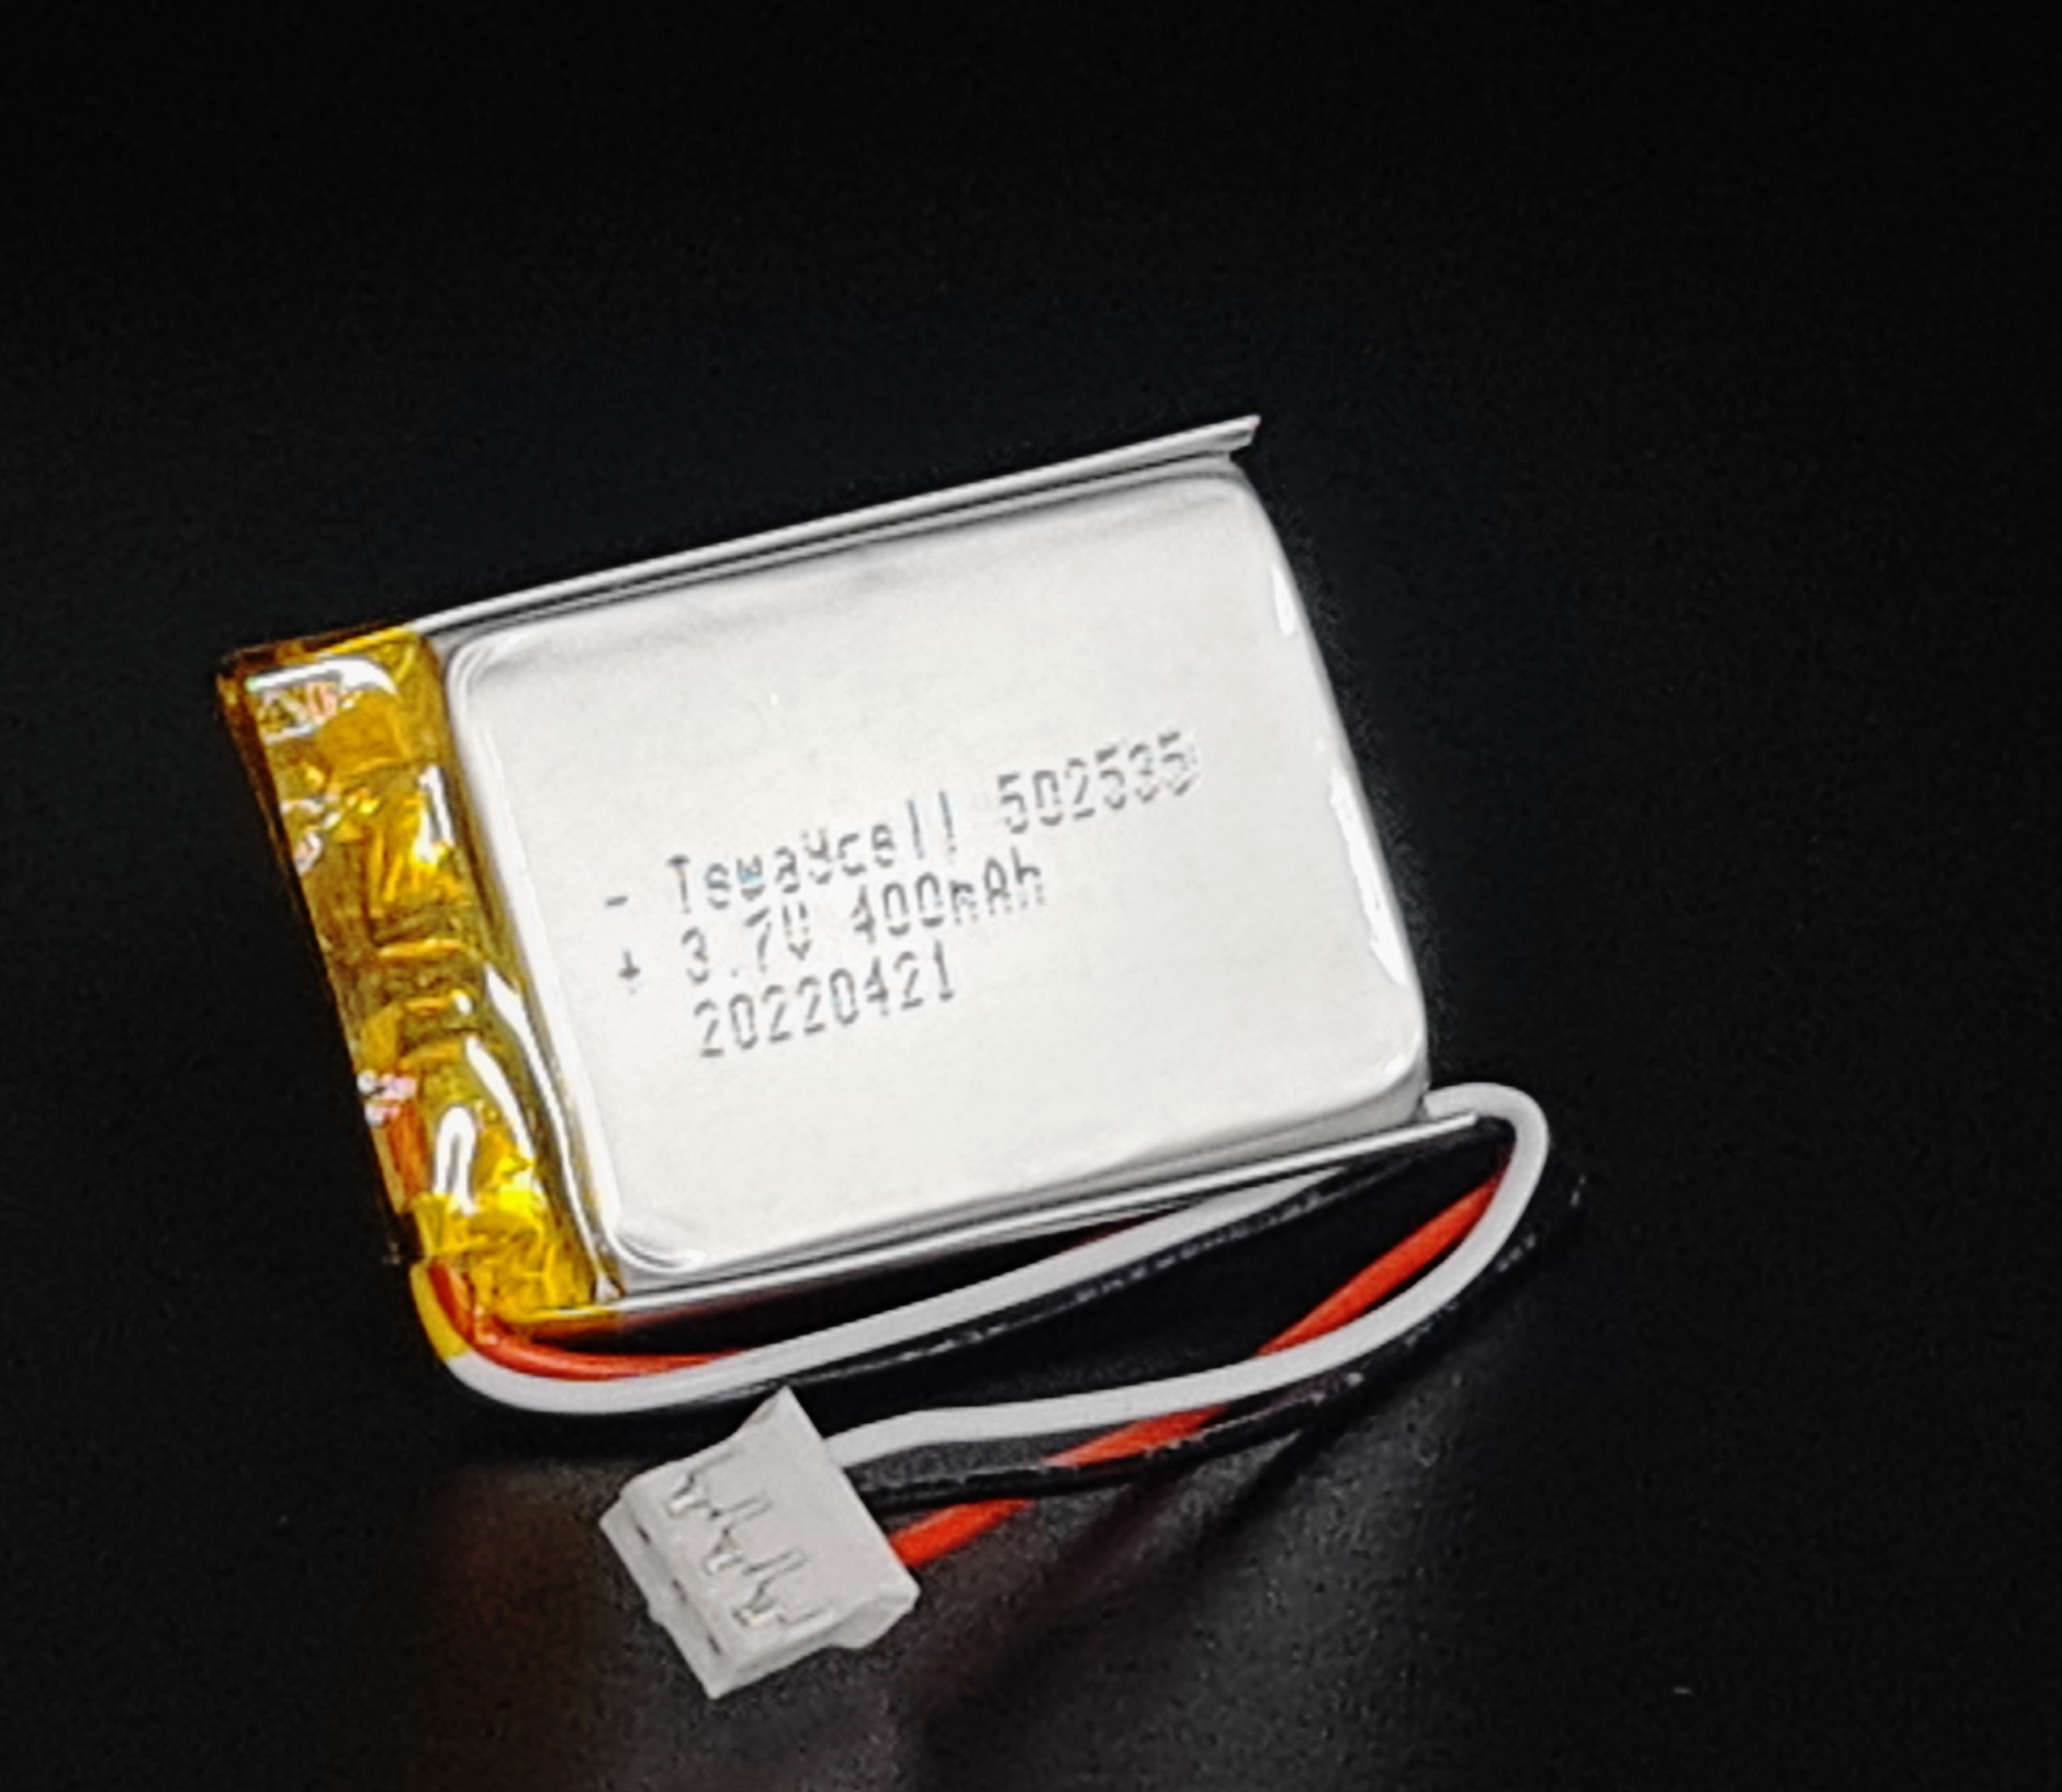 502535 Lithium ion polymer Battery